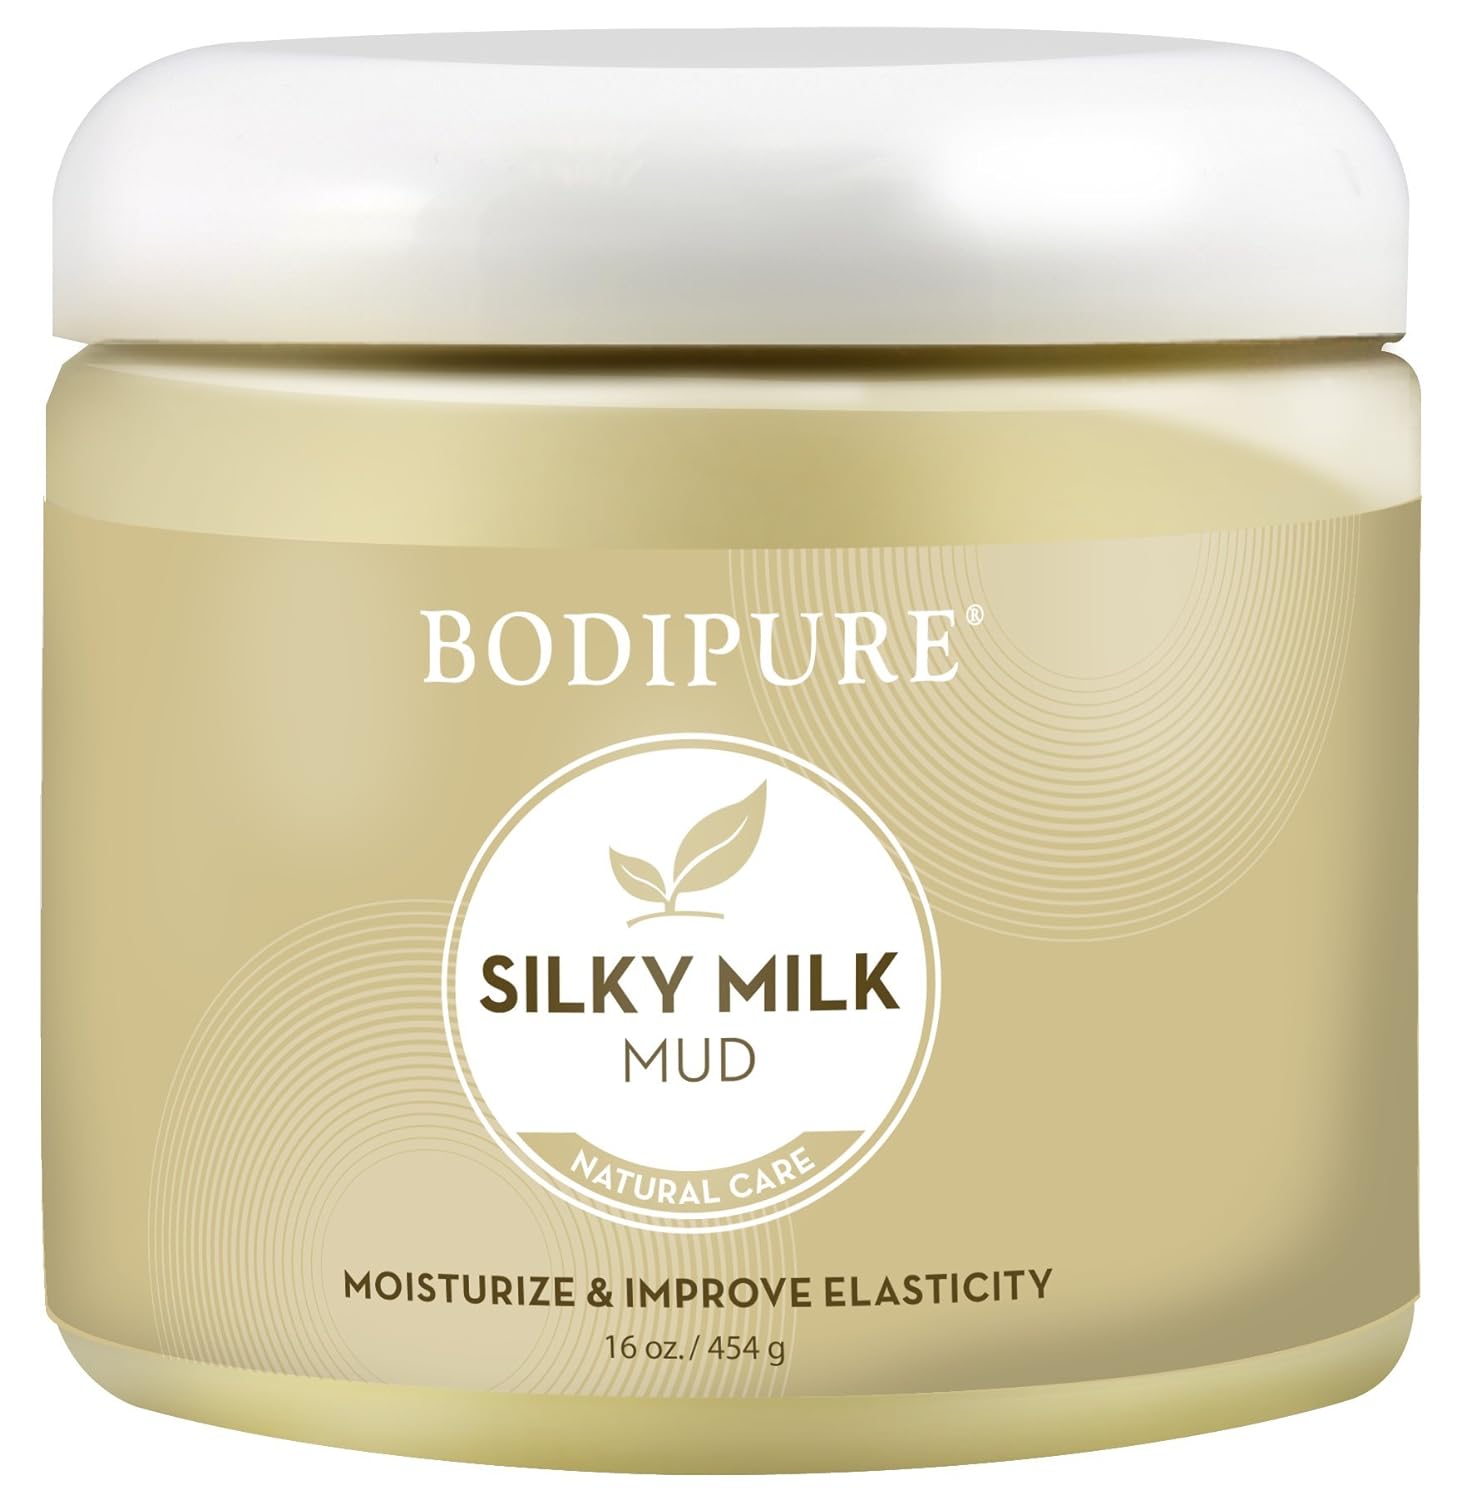 Bodipure Silky Milk Mud Mask for Body – Rich in Essential Milk Proteins, and Vitamins – Spa Quality Mud Treatment Moisturizing, and Re-hydrating Dry Skin, 16